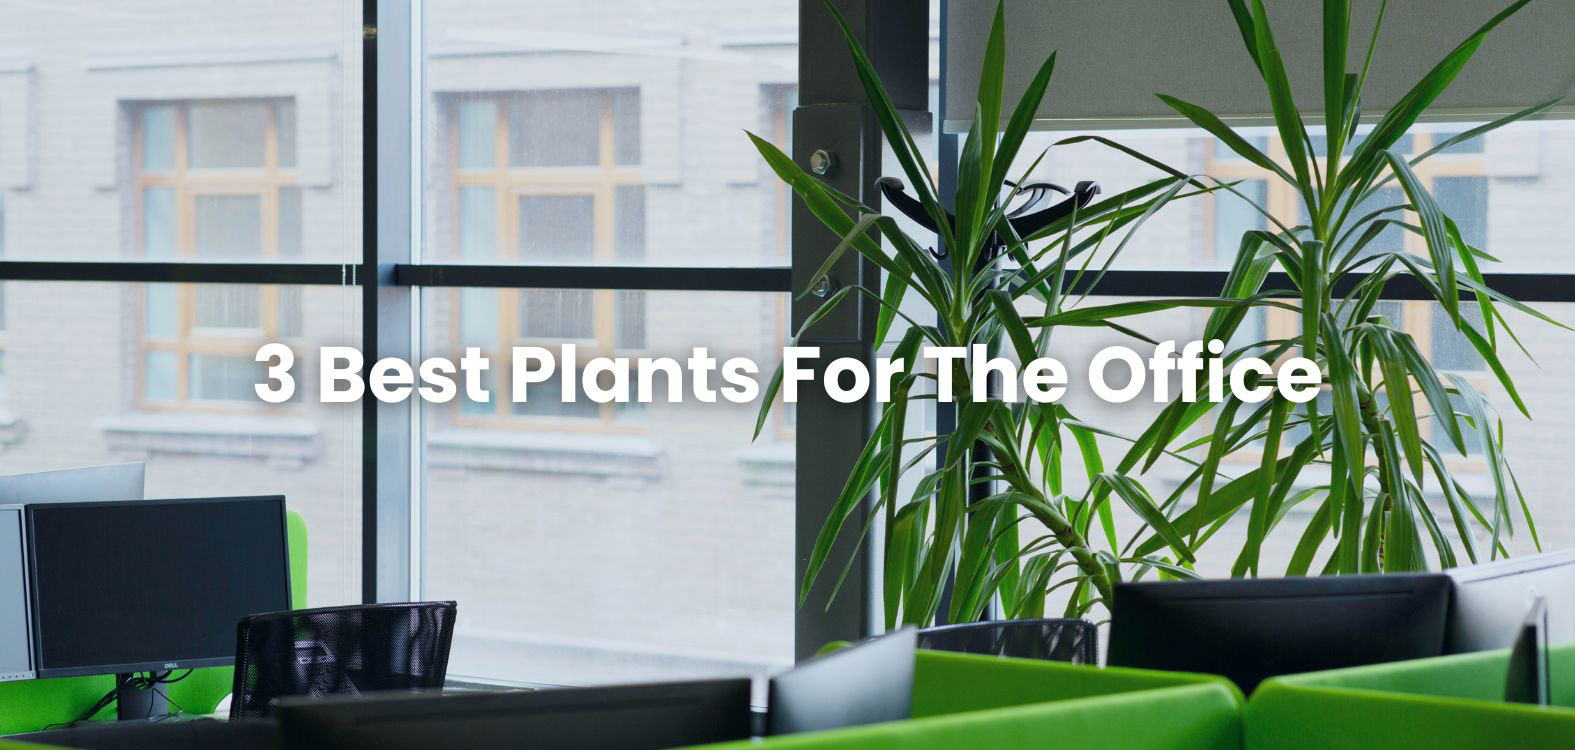 3 Best Plants For The Office